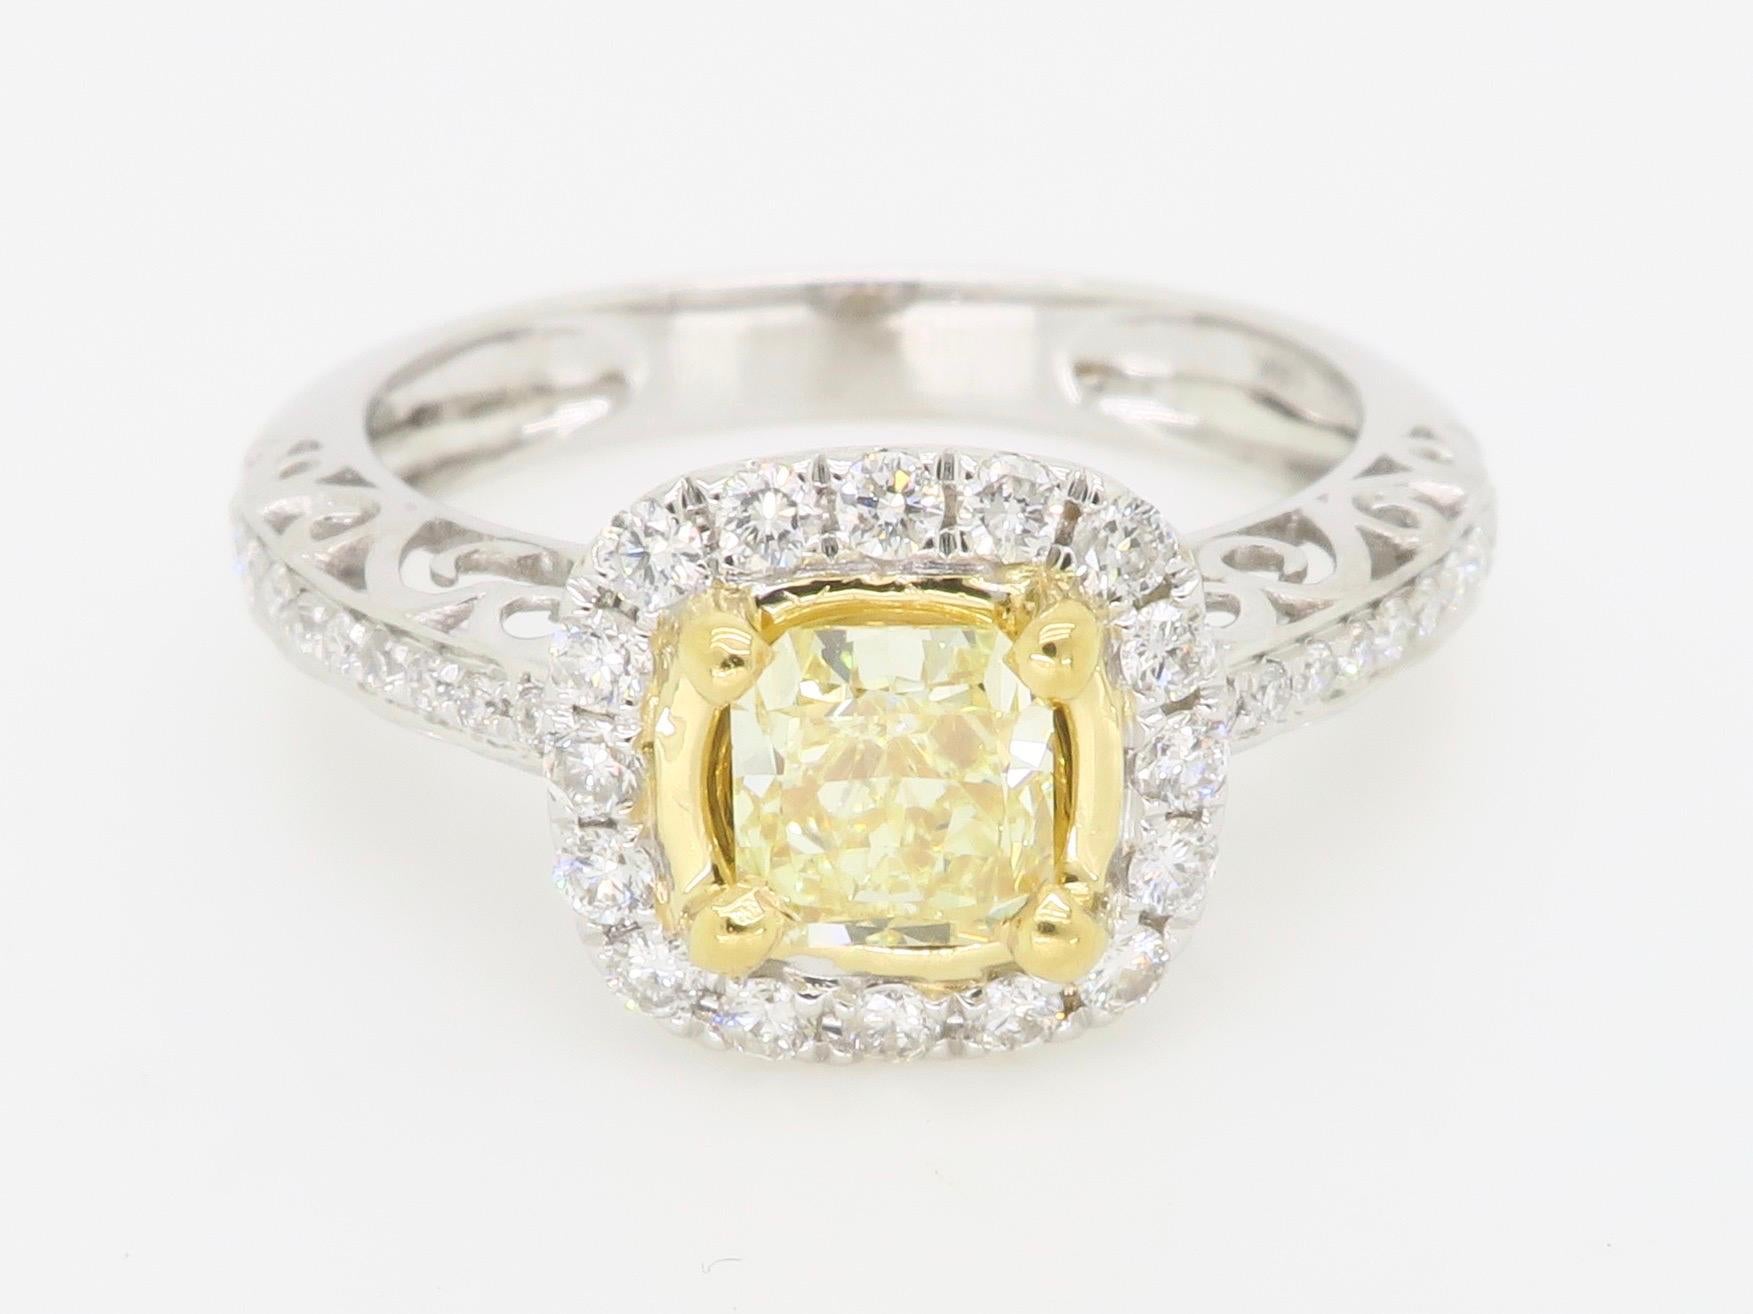 Stunning Yellow Diamond set into a halo diamond ring crafted in 18k White Gold. 

Center Diamond Carat Weight: Approximately .58CT
Center Diamond Cut: Cushion Cut
Center Diamond Color: Fancy Yellow    
Center Diamond Clarity: S11
Total Diamond Carat